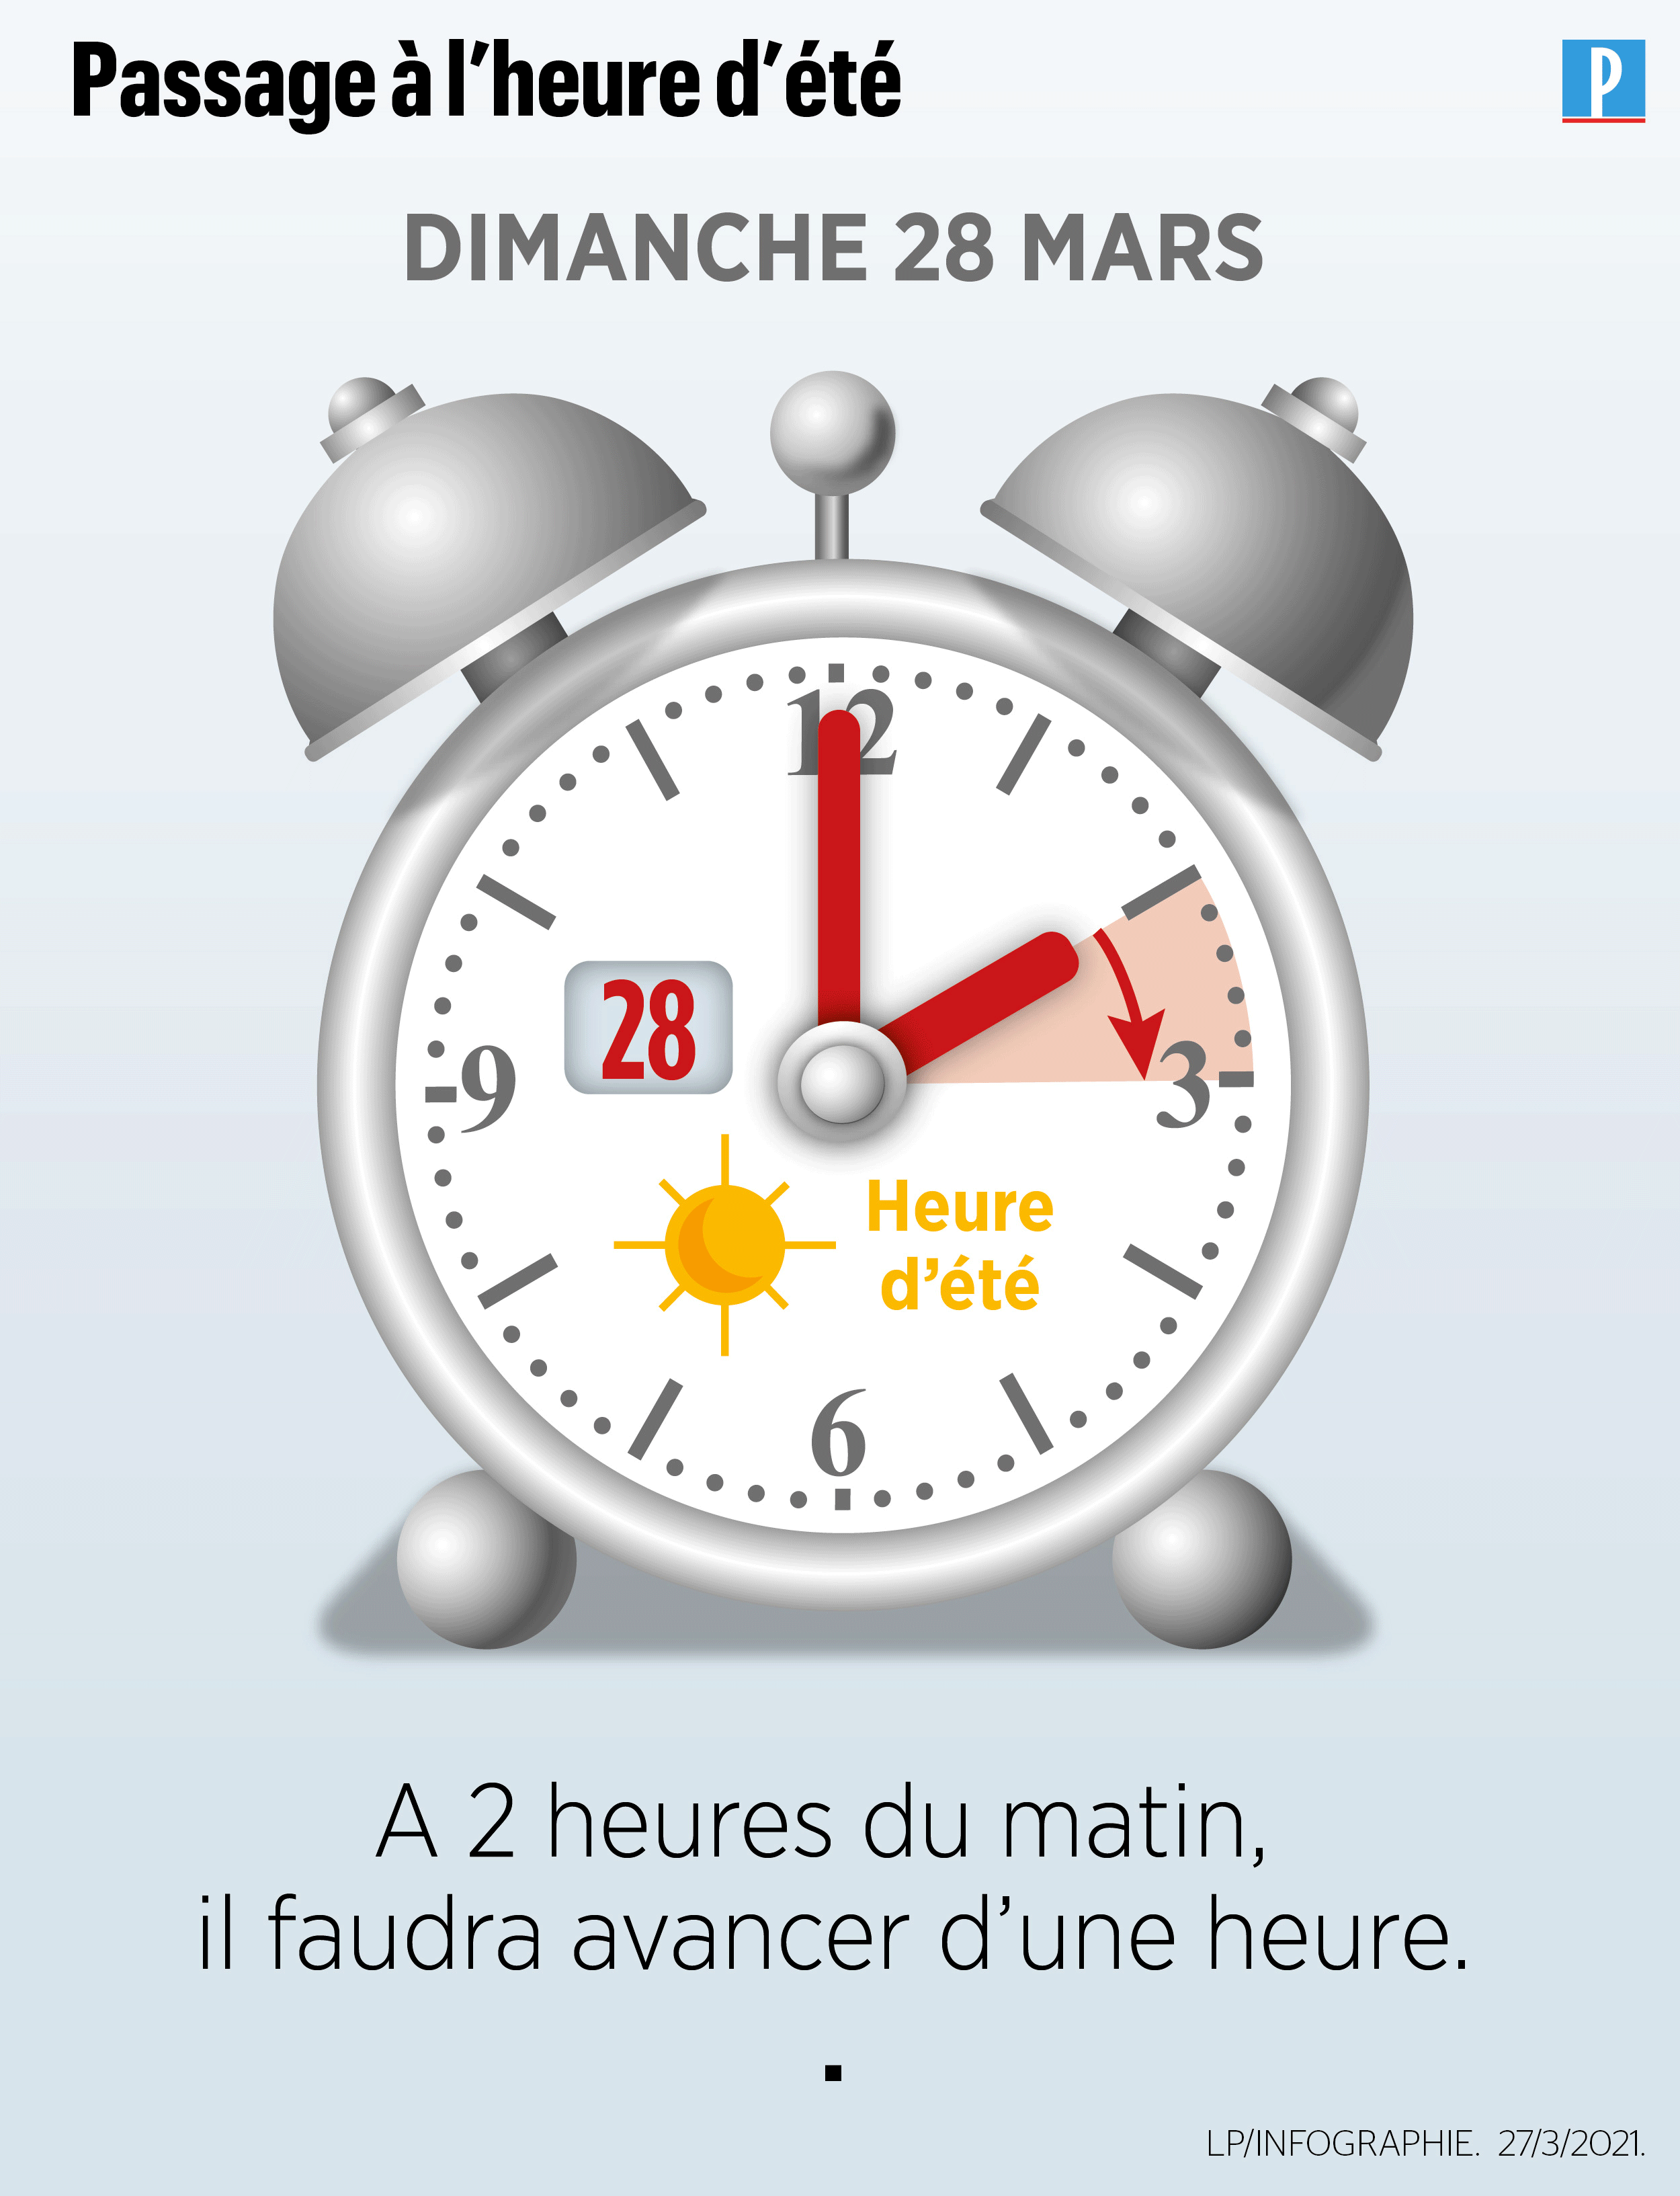 changement dheure hiver 2021 suisse anti aging)